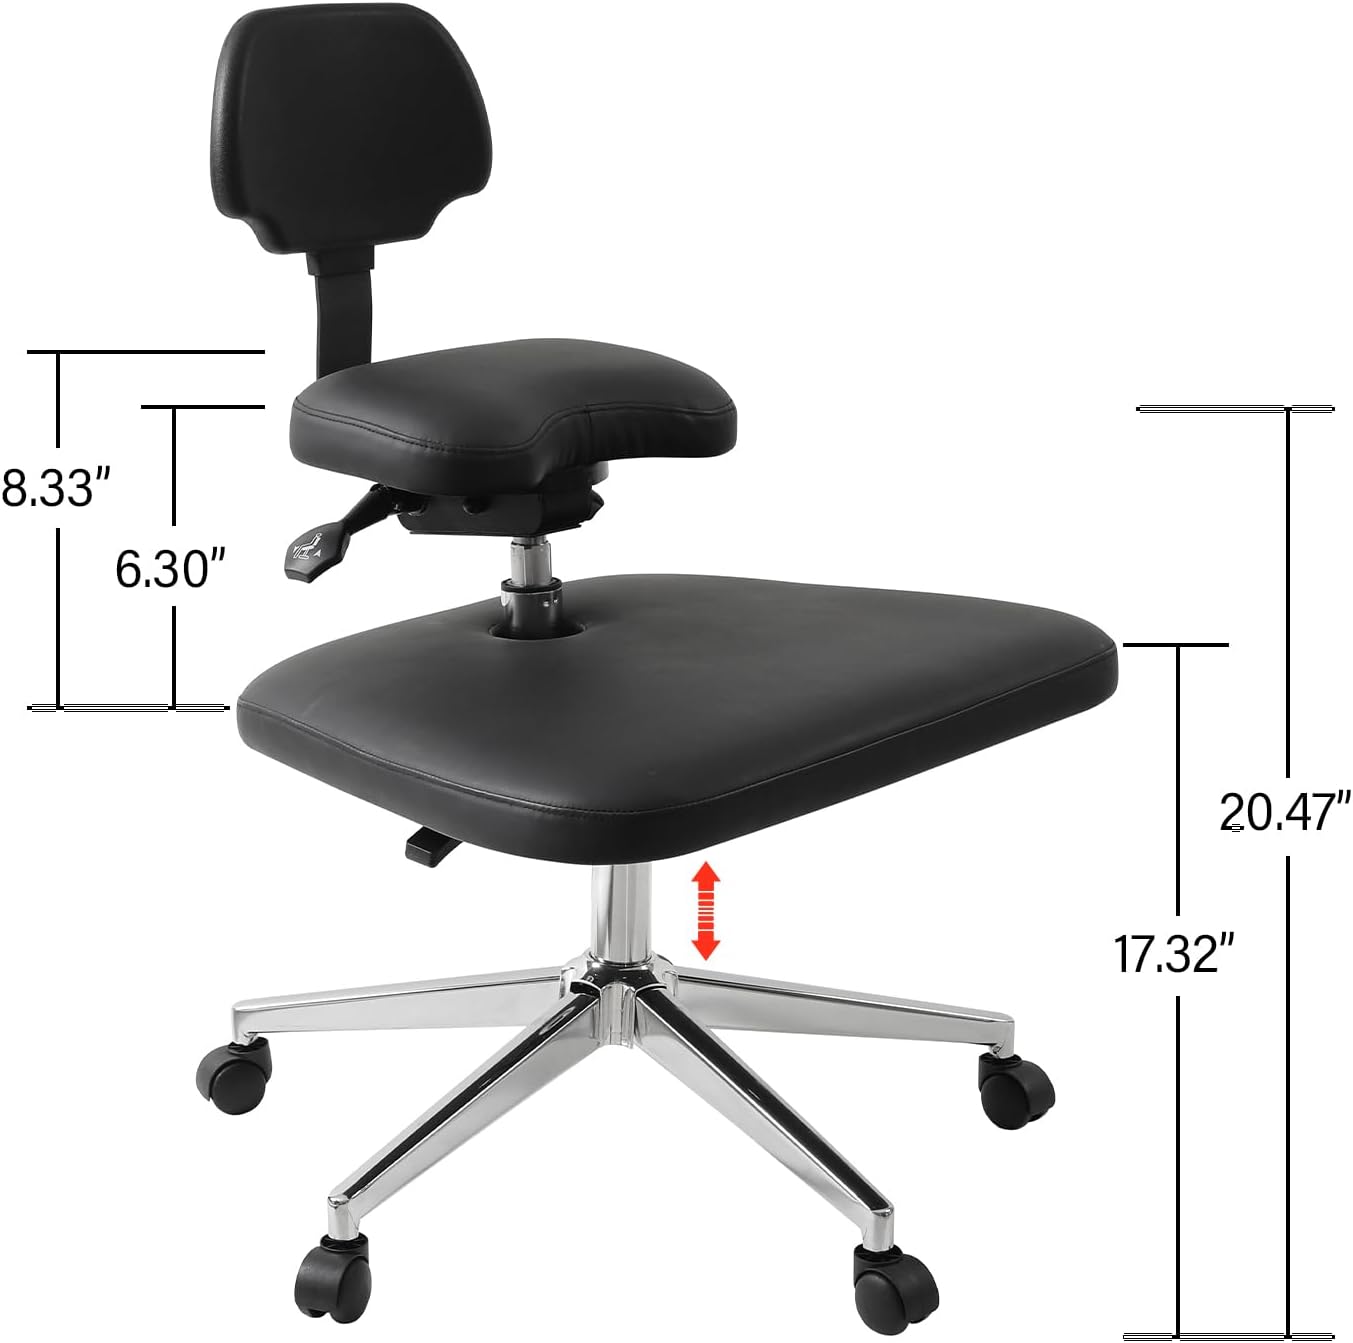 NEW - LHOOCX Cross-Legged Chair, Kneeling Chair with Lumbar Support and Adjustable Recline Angle, Ergonomic Office Chair for Office, Home and Yoga Enthusiasts, Meditation Fanatics (Black) - Retail $249